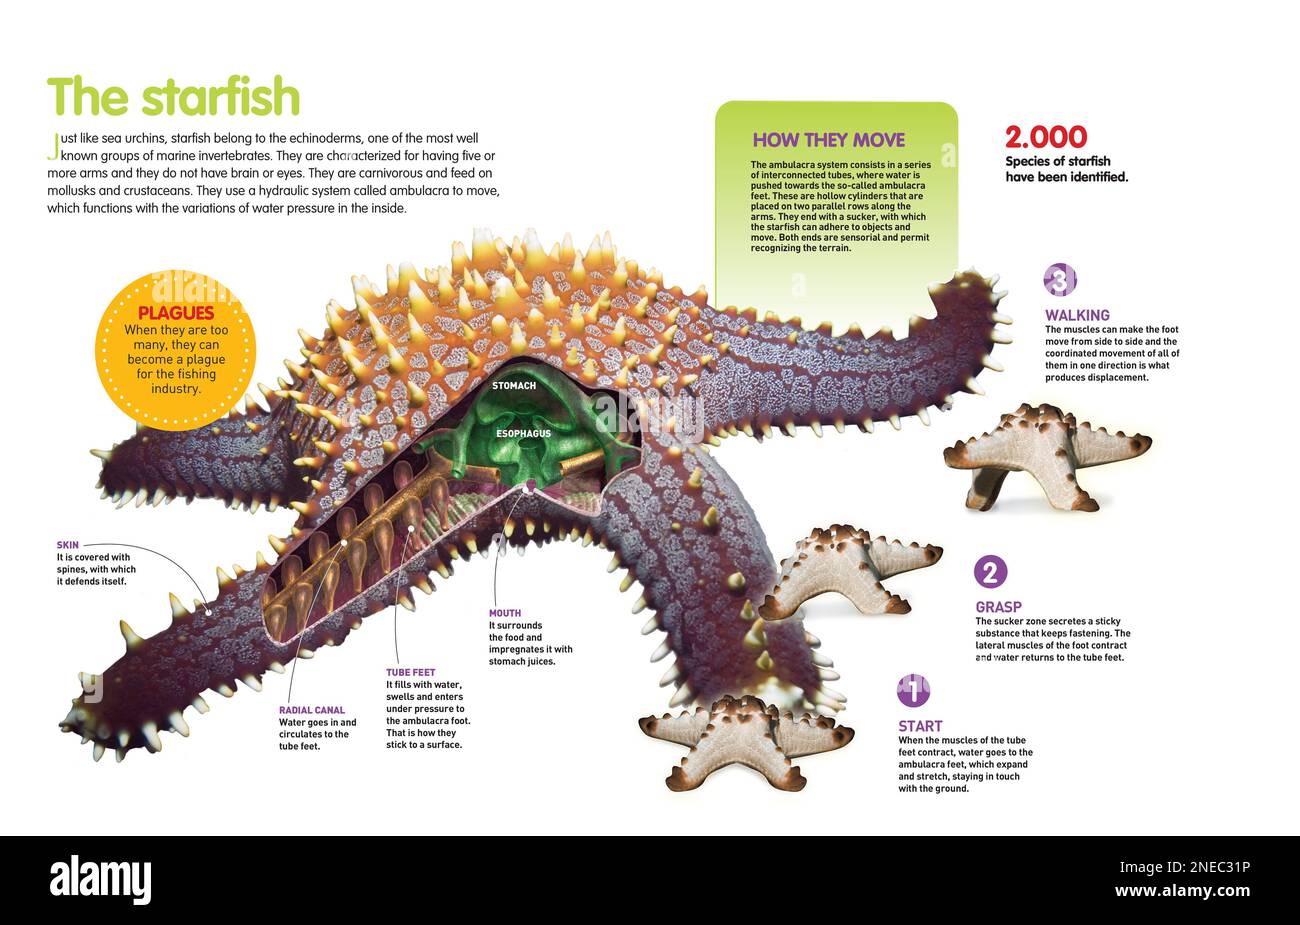 Infographic about the sea star, its locomotion system and feeding habits, as web as its internal organs. [QuarkXPress (.qxp); Adobe InDesign (.indd); 4960x3188]. Stock Photo